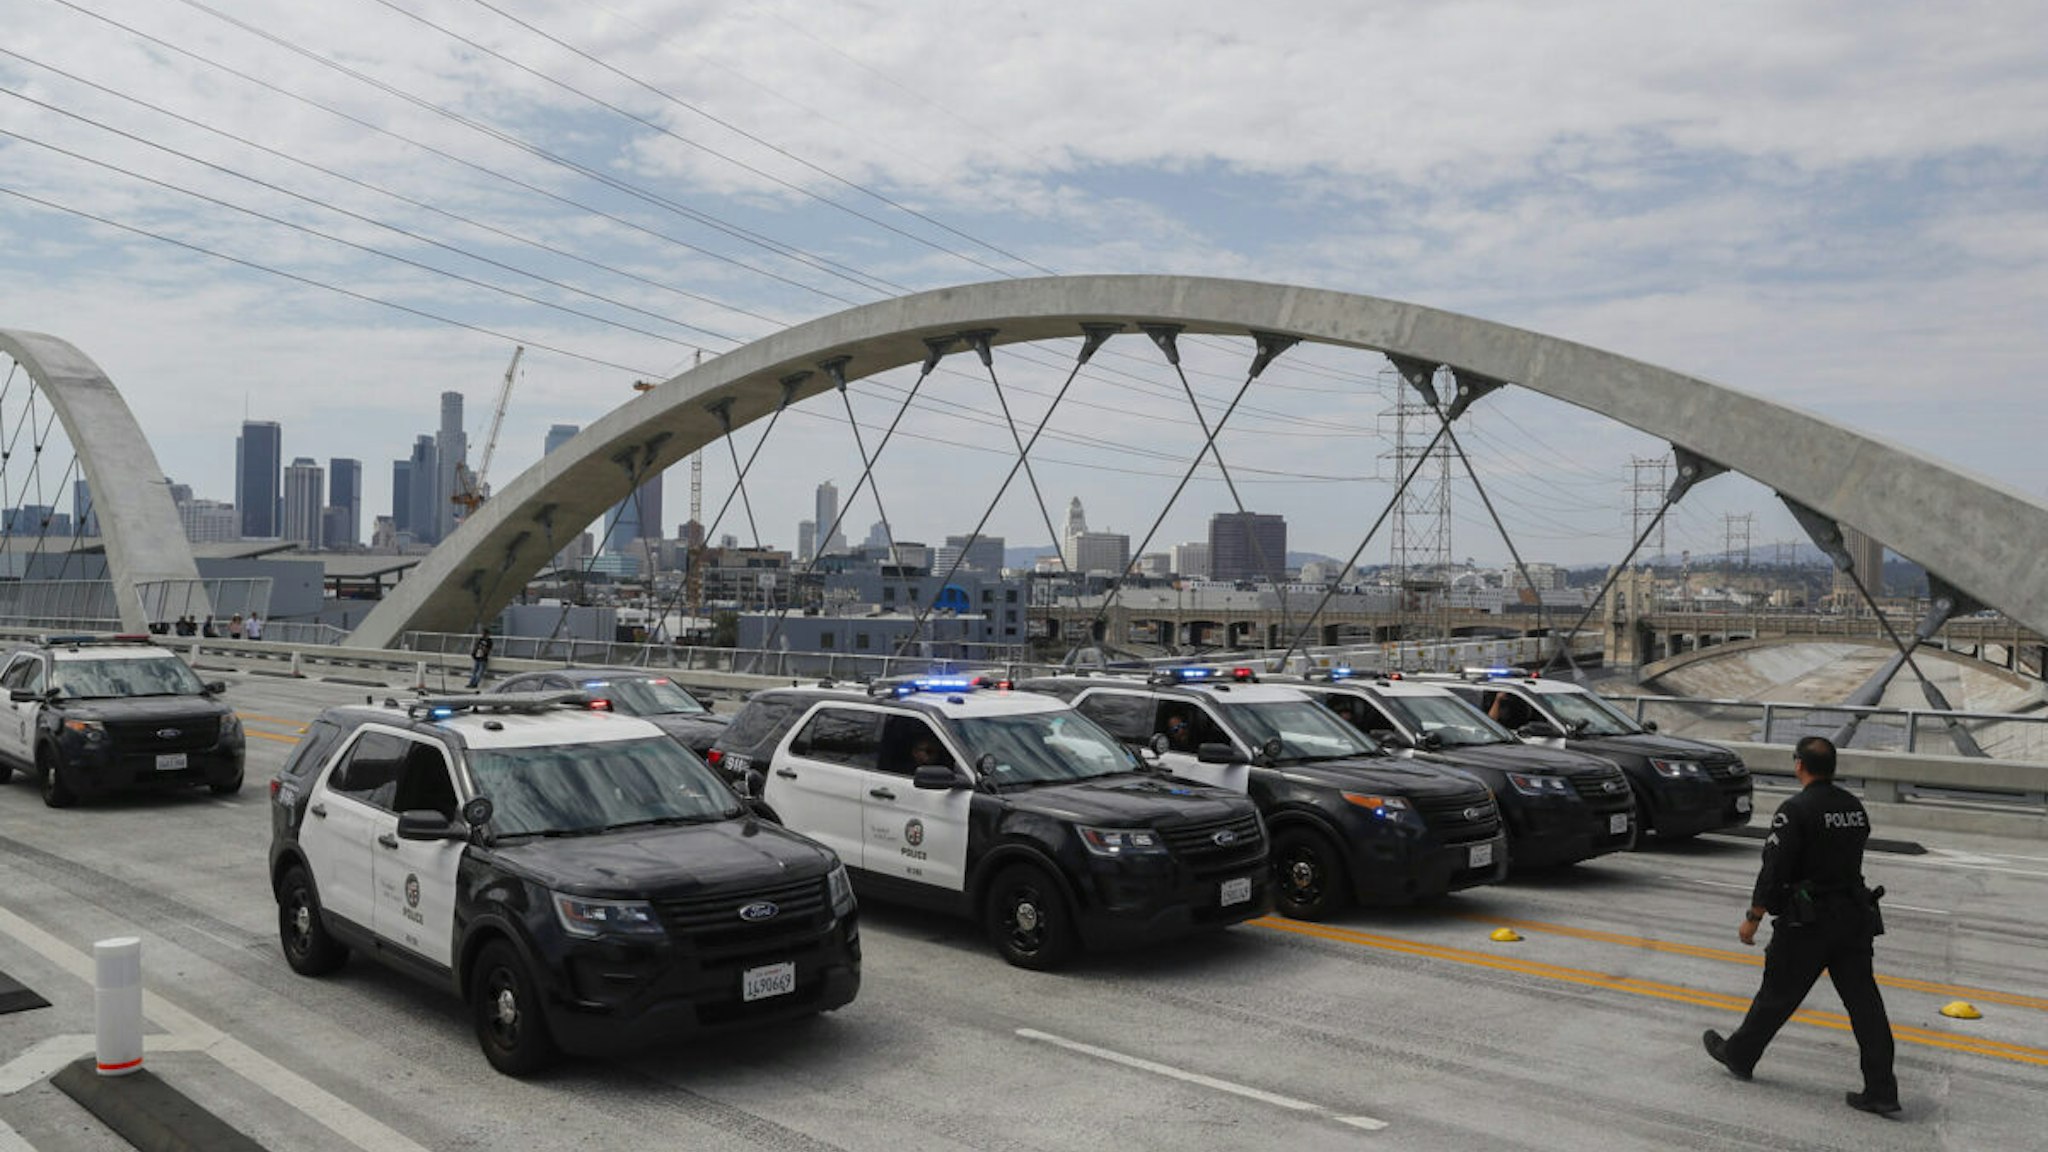 Los Angeles, CA, Sunday, July 31, 2022 - LAPD officers gather to sweep a bike club off the Sixth Street Viaduct while in the midst of a traffic enforcement operation from 2pm to 10pm